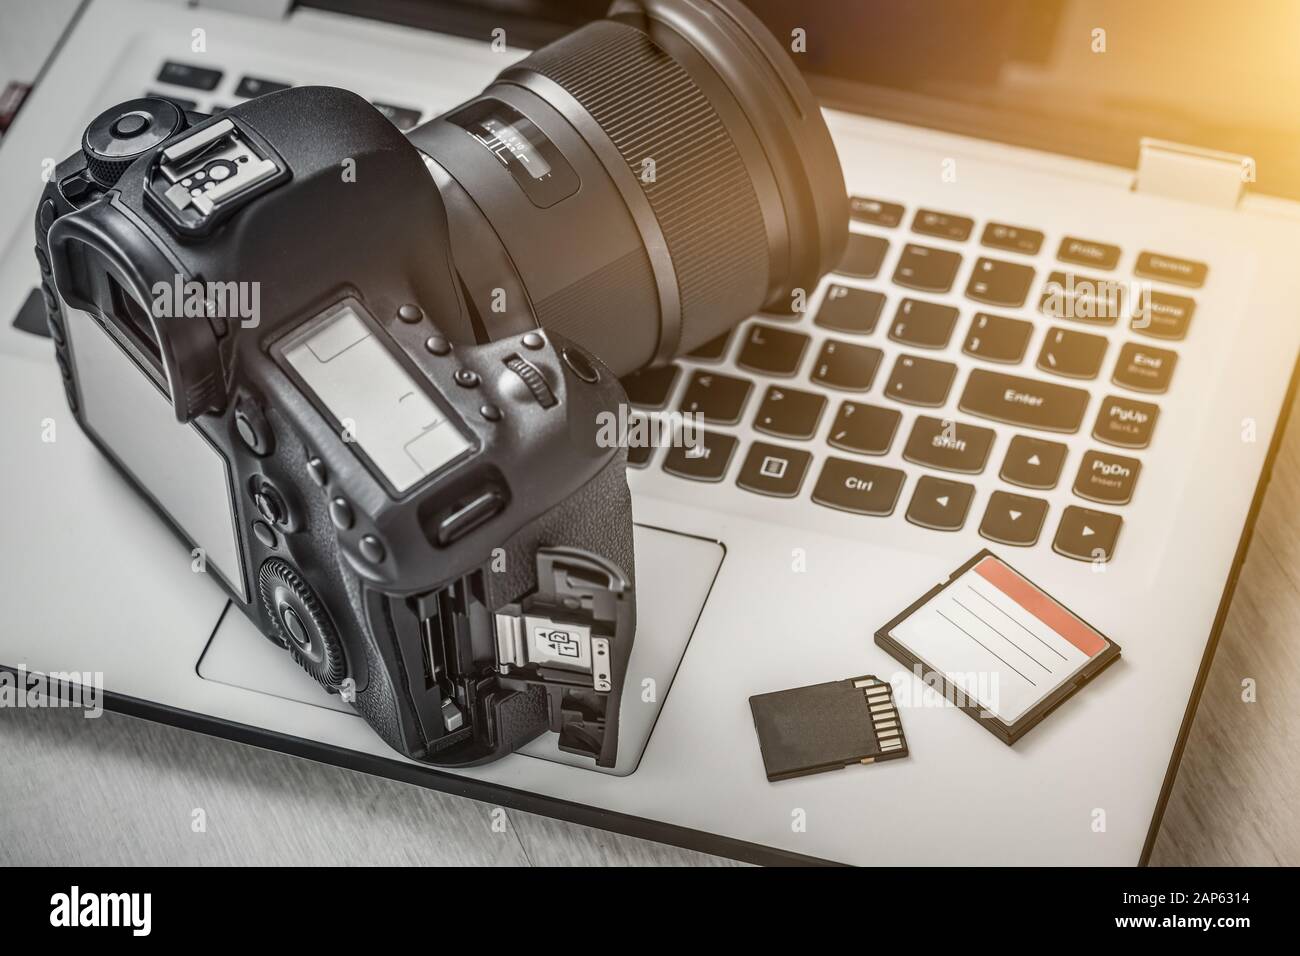 Modern digital DSLR camera and computer workstation. Photography and videography concept. Stock Photo